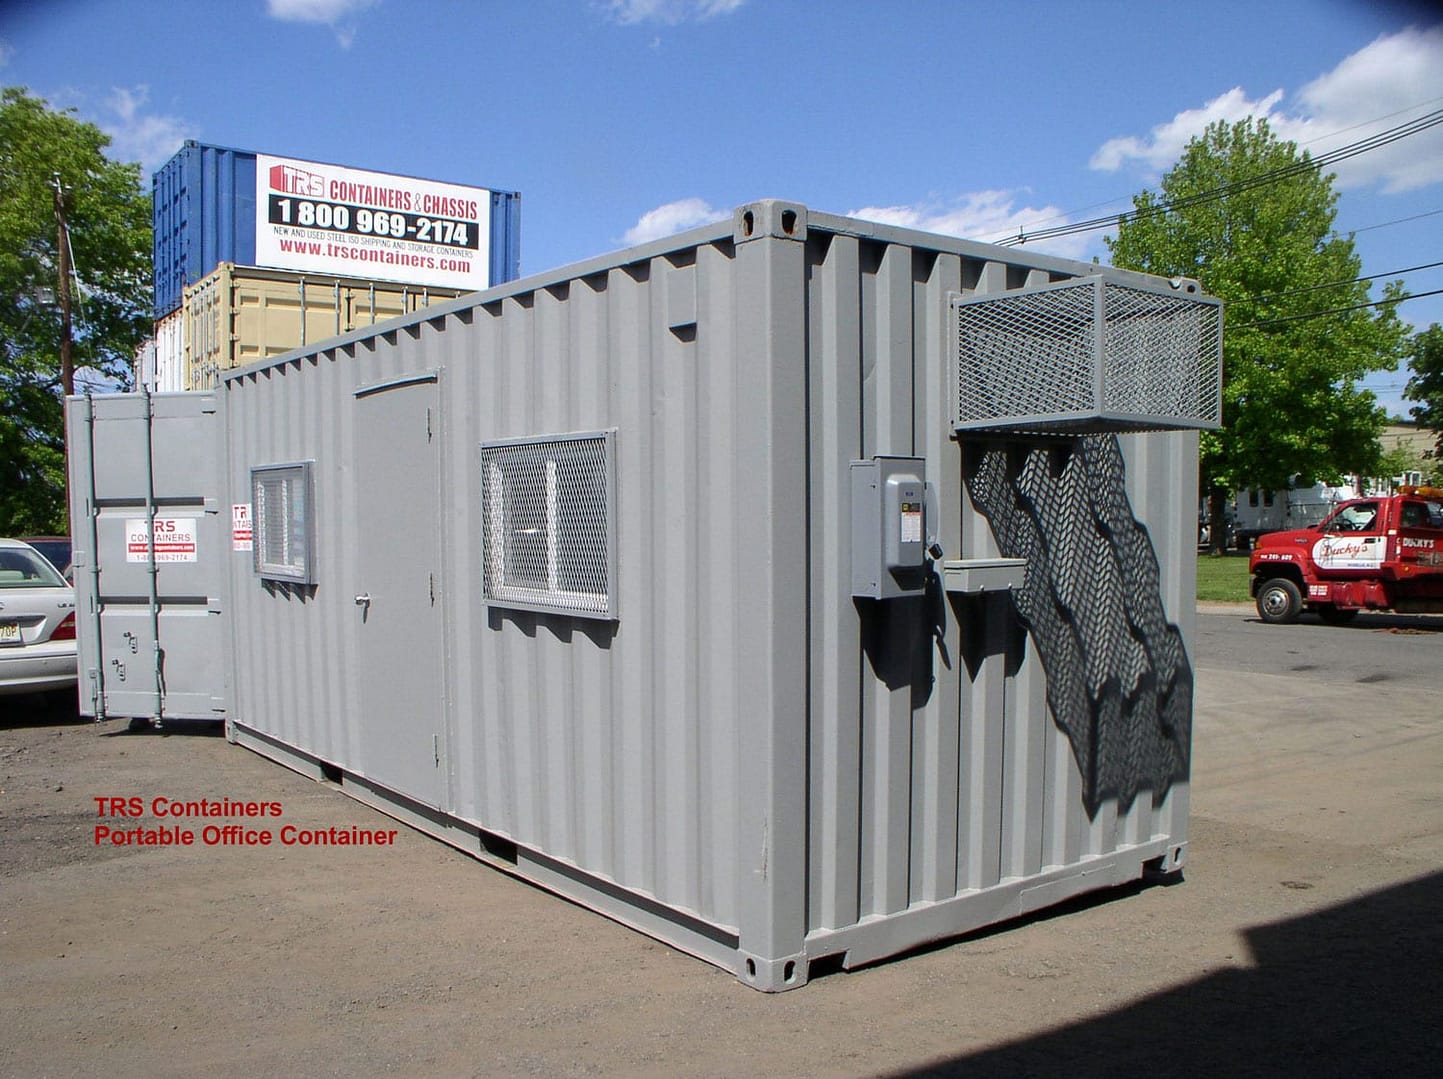 TRS Containers modifies 20 foot long container into portable office space. Equiped for the comfort and safety of staff